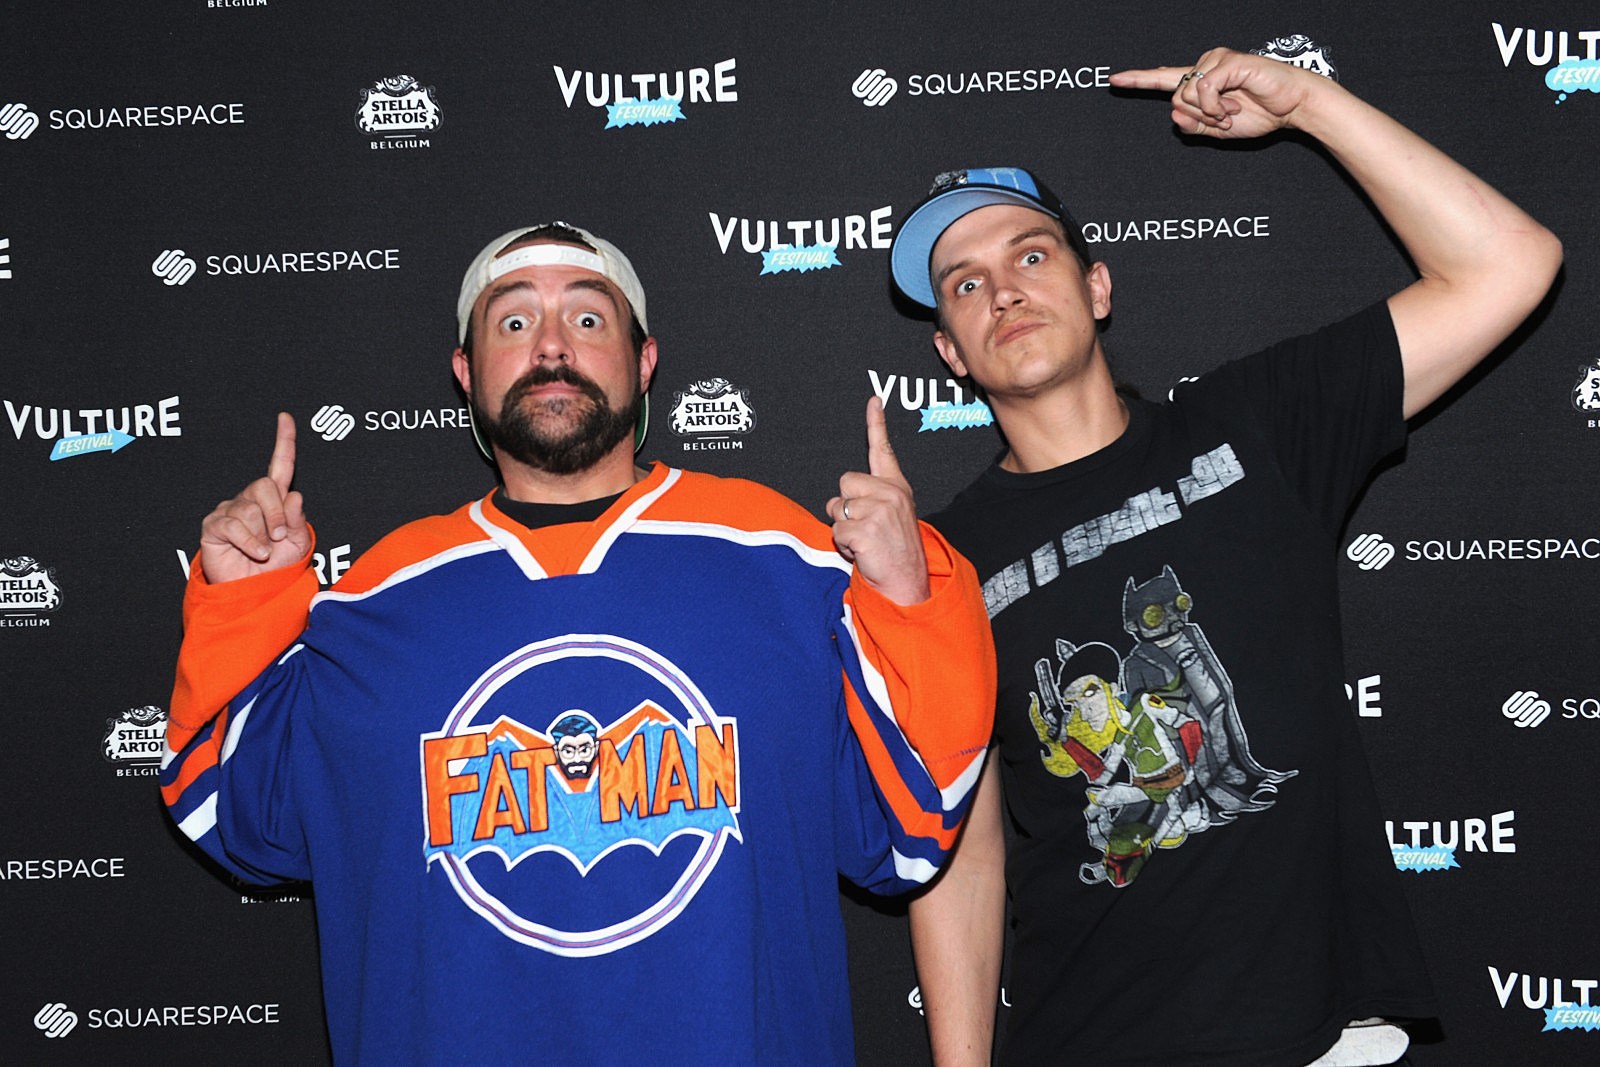 Silent Bob actor Kevin Smith shed his iconic hockey jersey